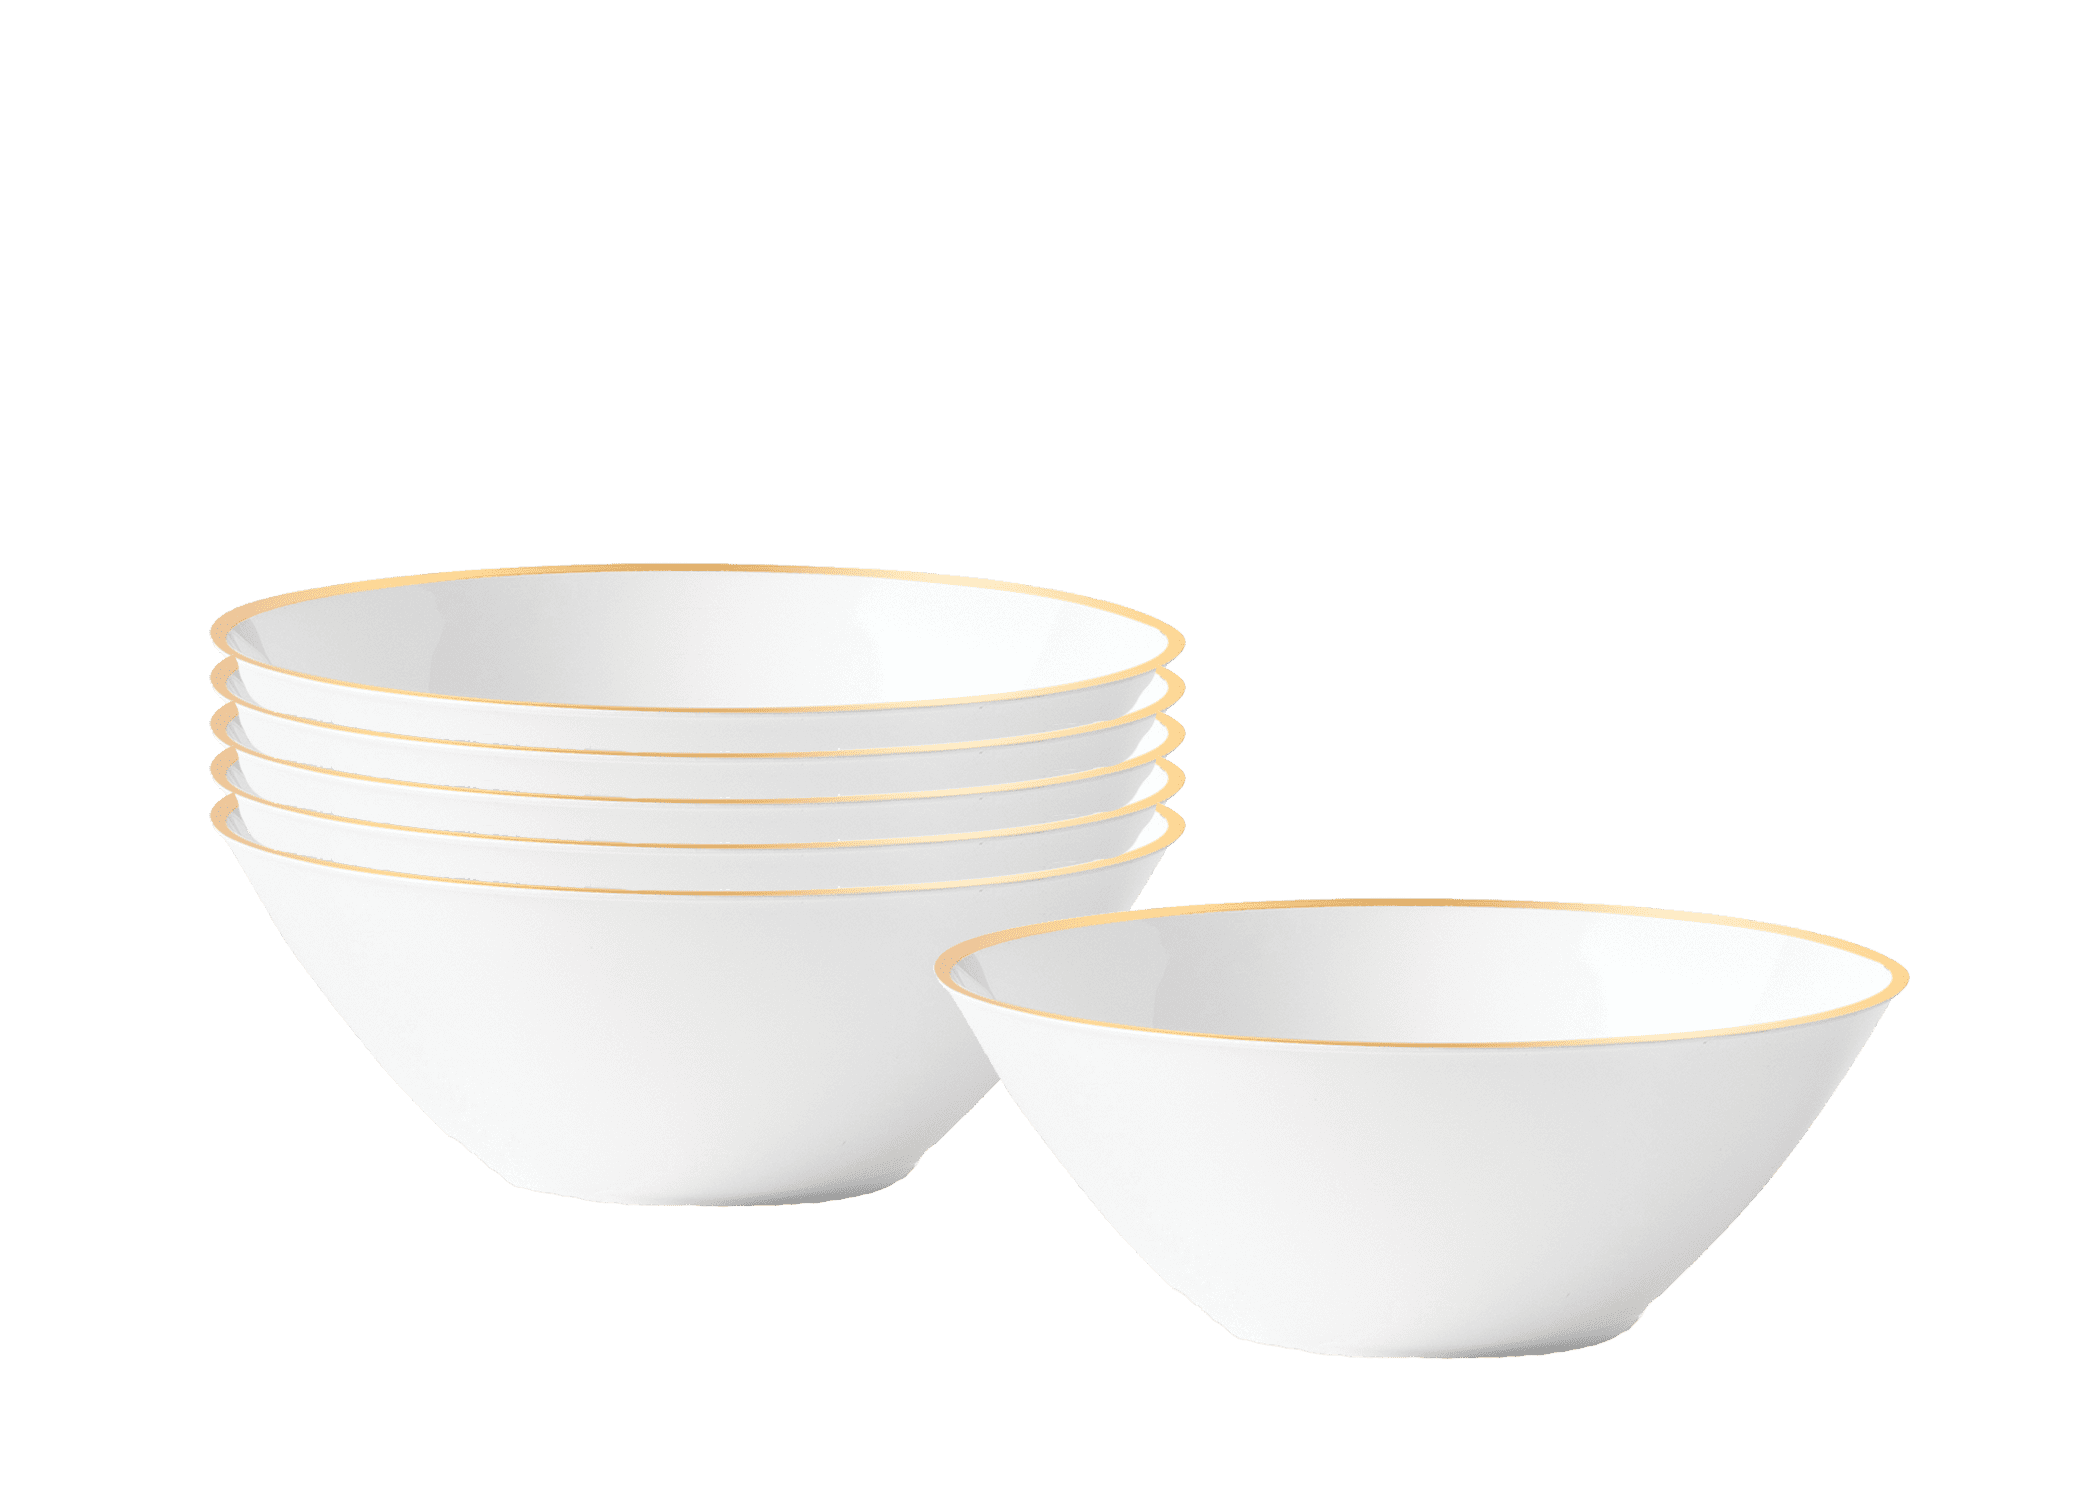 36 oz Disposable To Go Bowls with lids Black 150 set – Pony Packaging